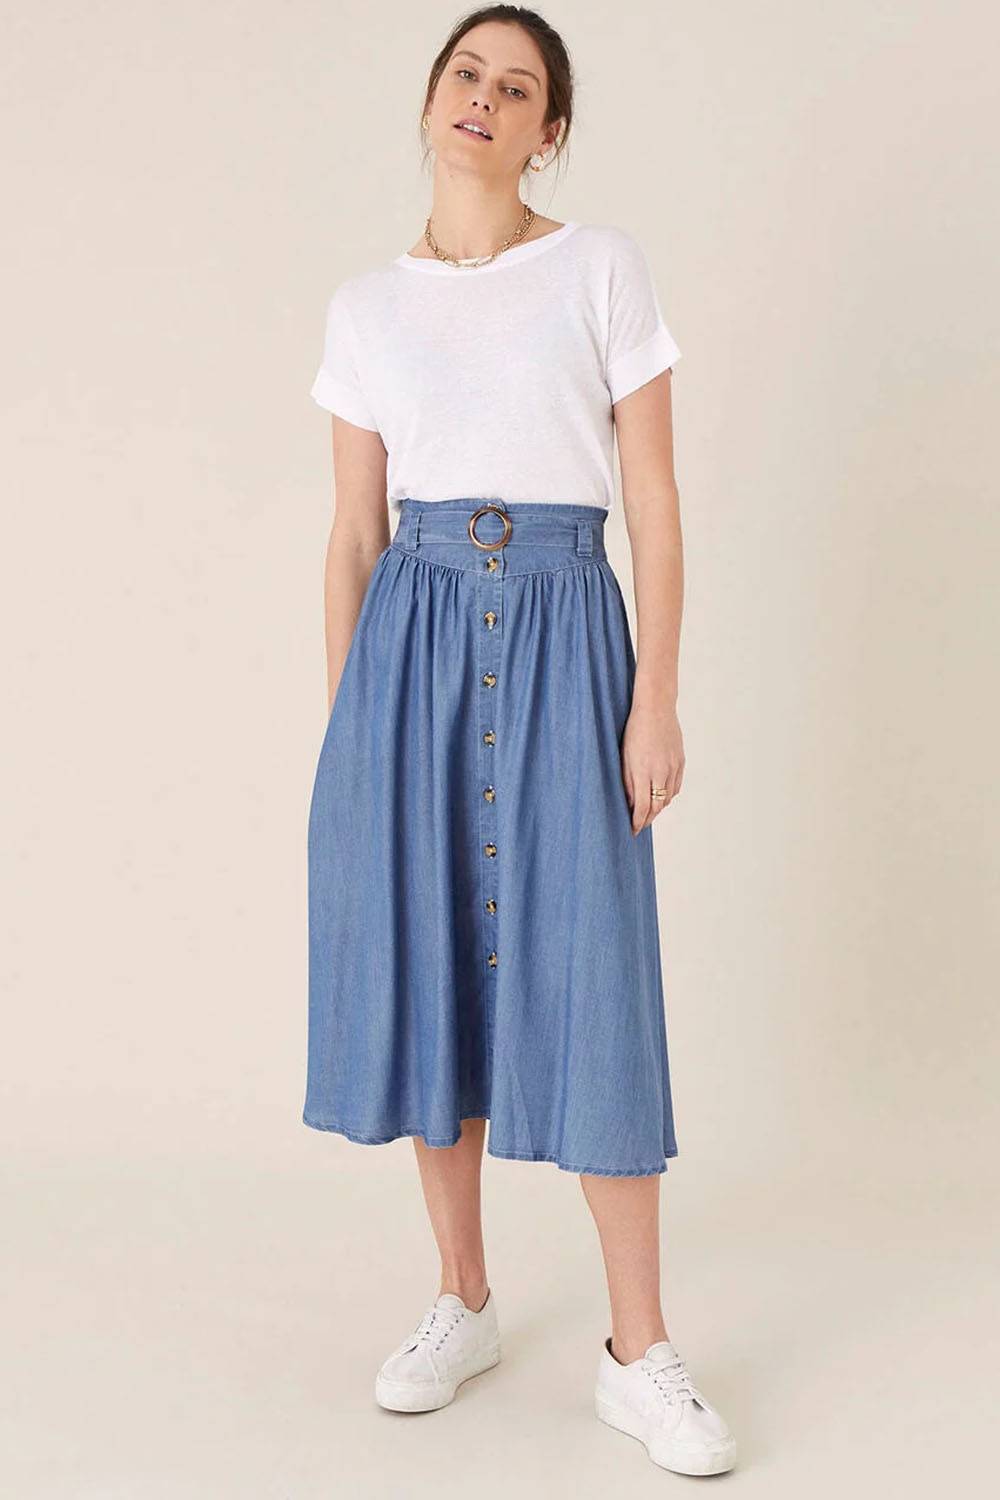 20 Best Affordable And Sustainable Denim Skirts | Panaprium